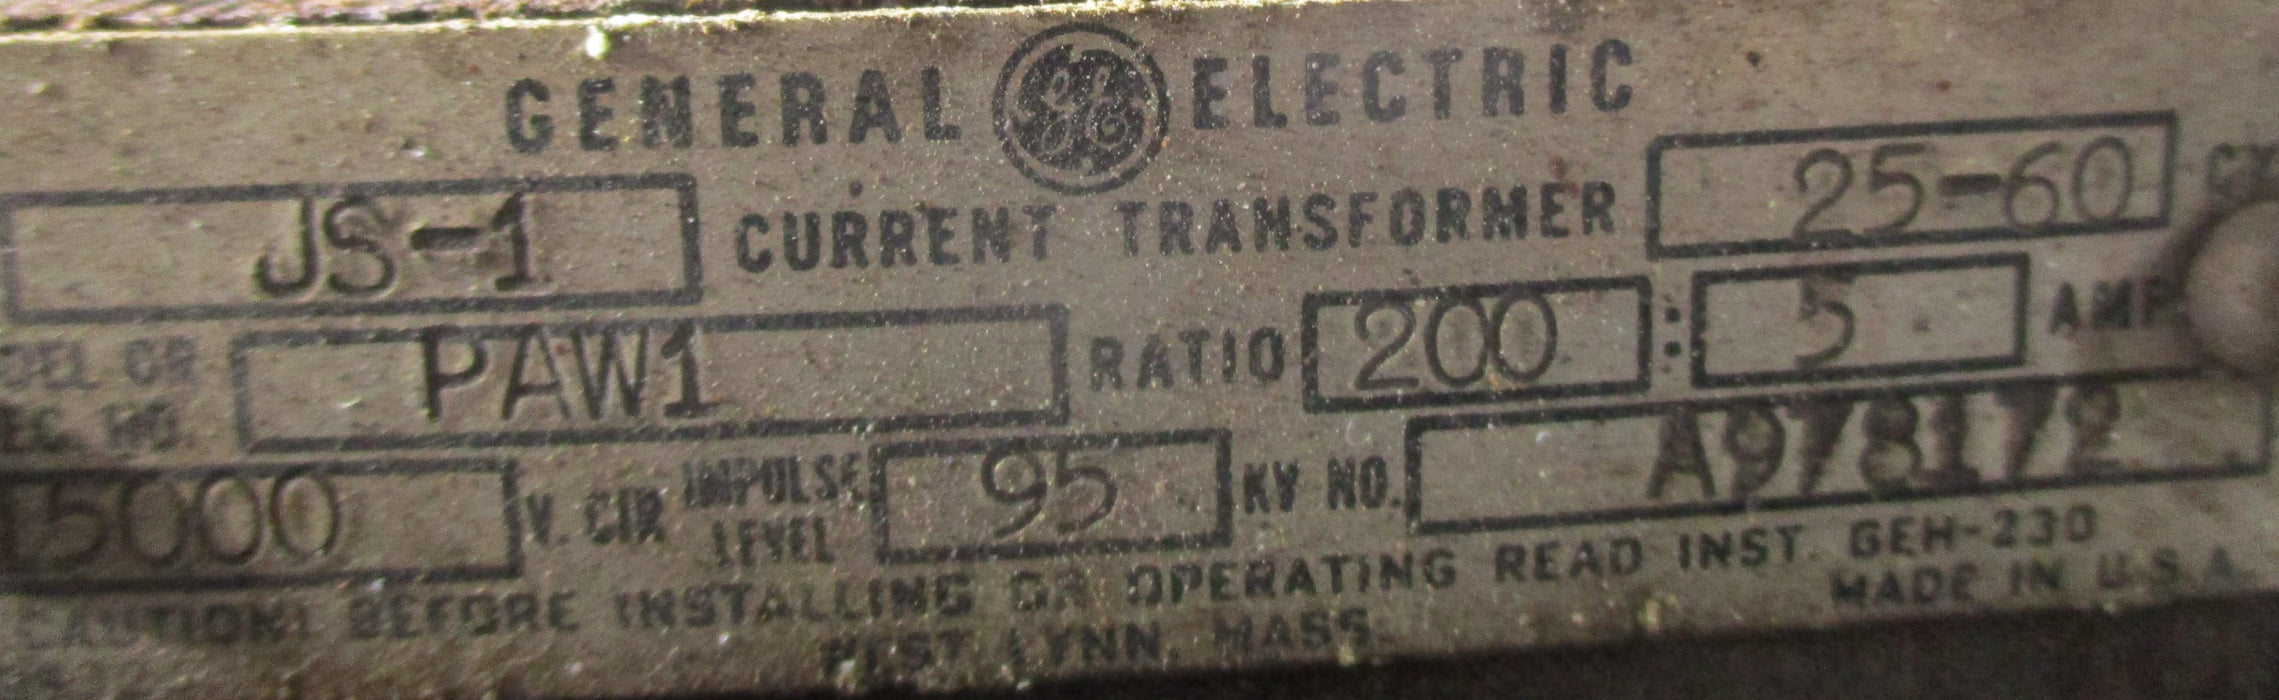 PAW1 General Electric - JS-1 Current Transformer